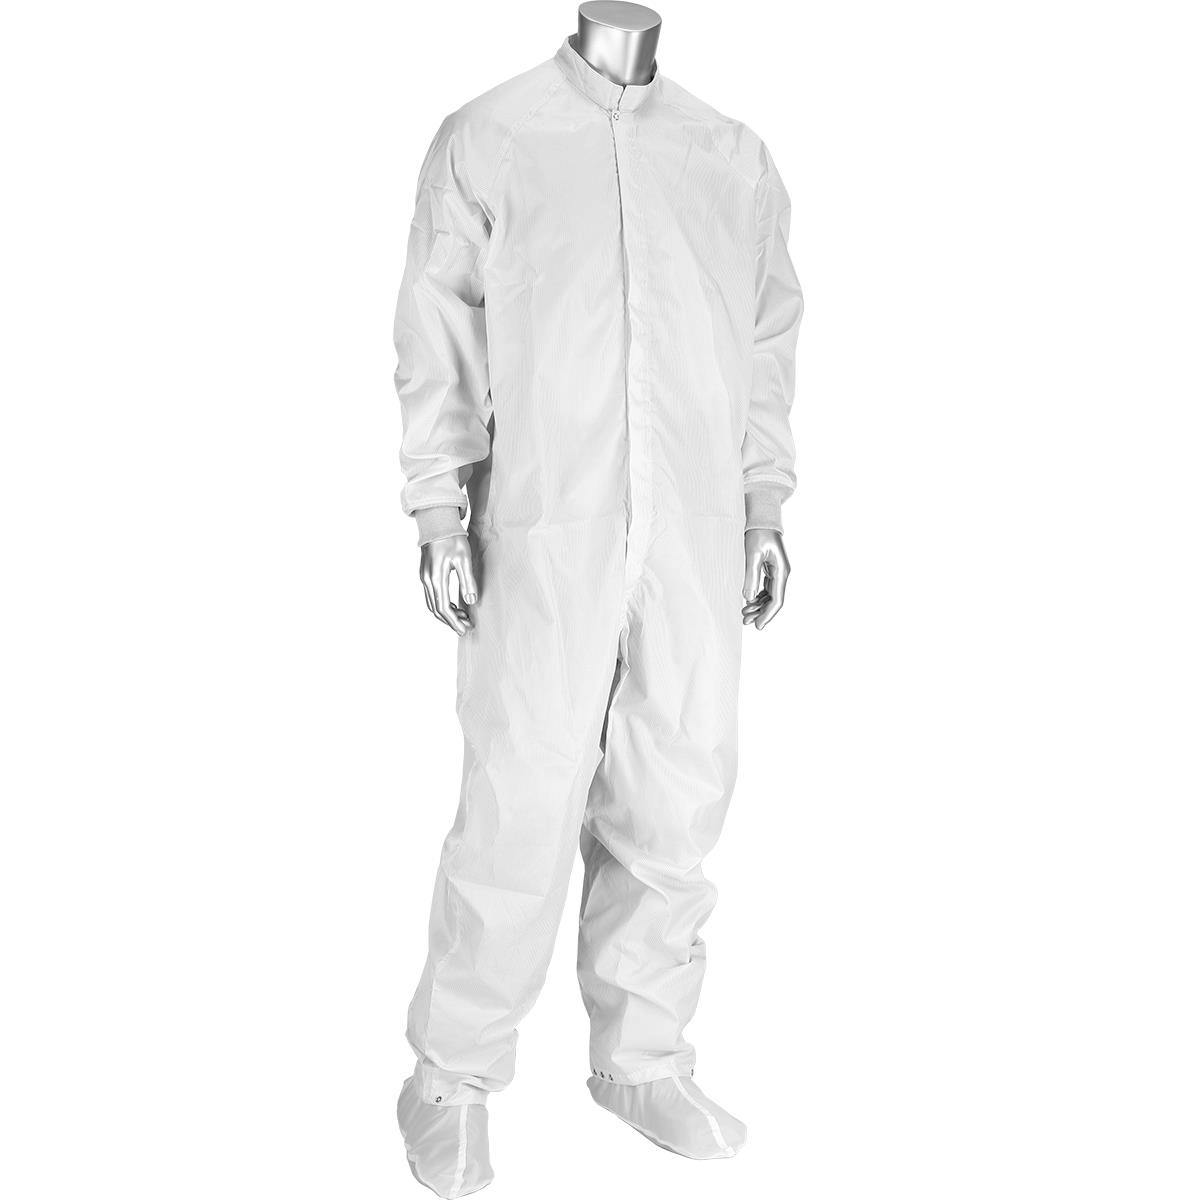 Disctek 2.5 Grid ISO 4 (Class 10) Cleanroom / ESD Coverall, White (CC1245-89WH)